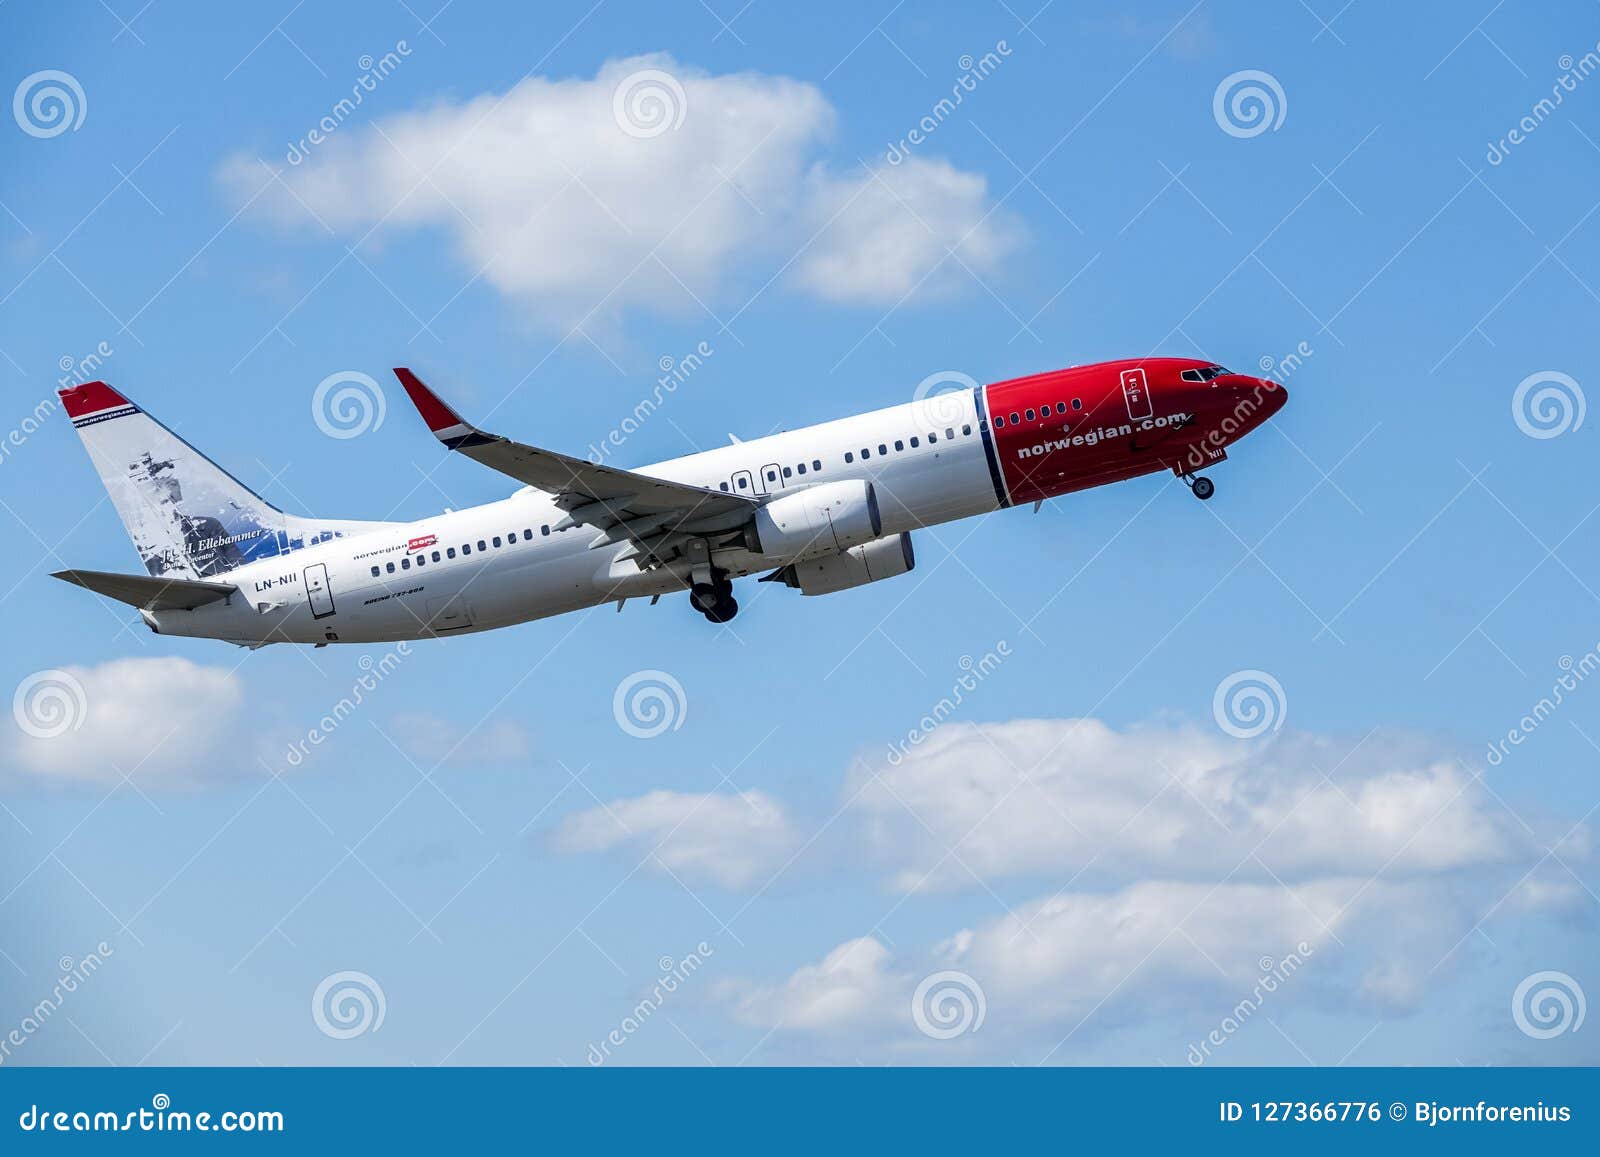 Norwegian Air Shuttle ASA, Boeing 737 - 800 Off Editorial Photo - Image of holiday, business: 127366776